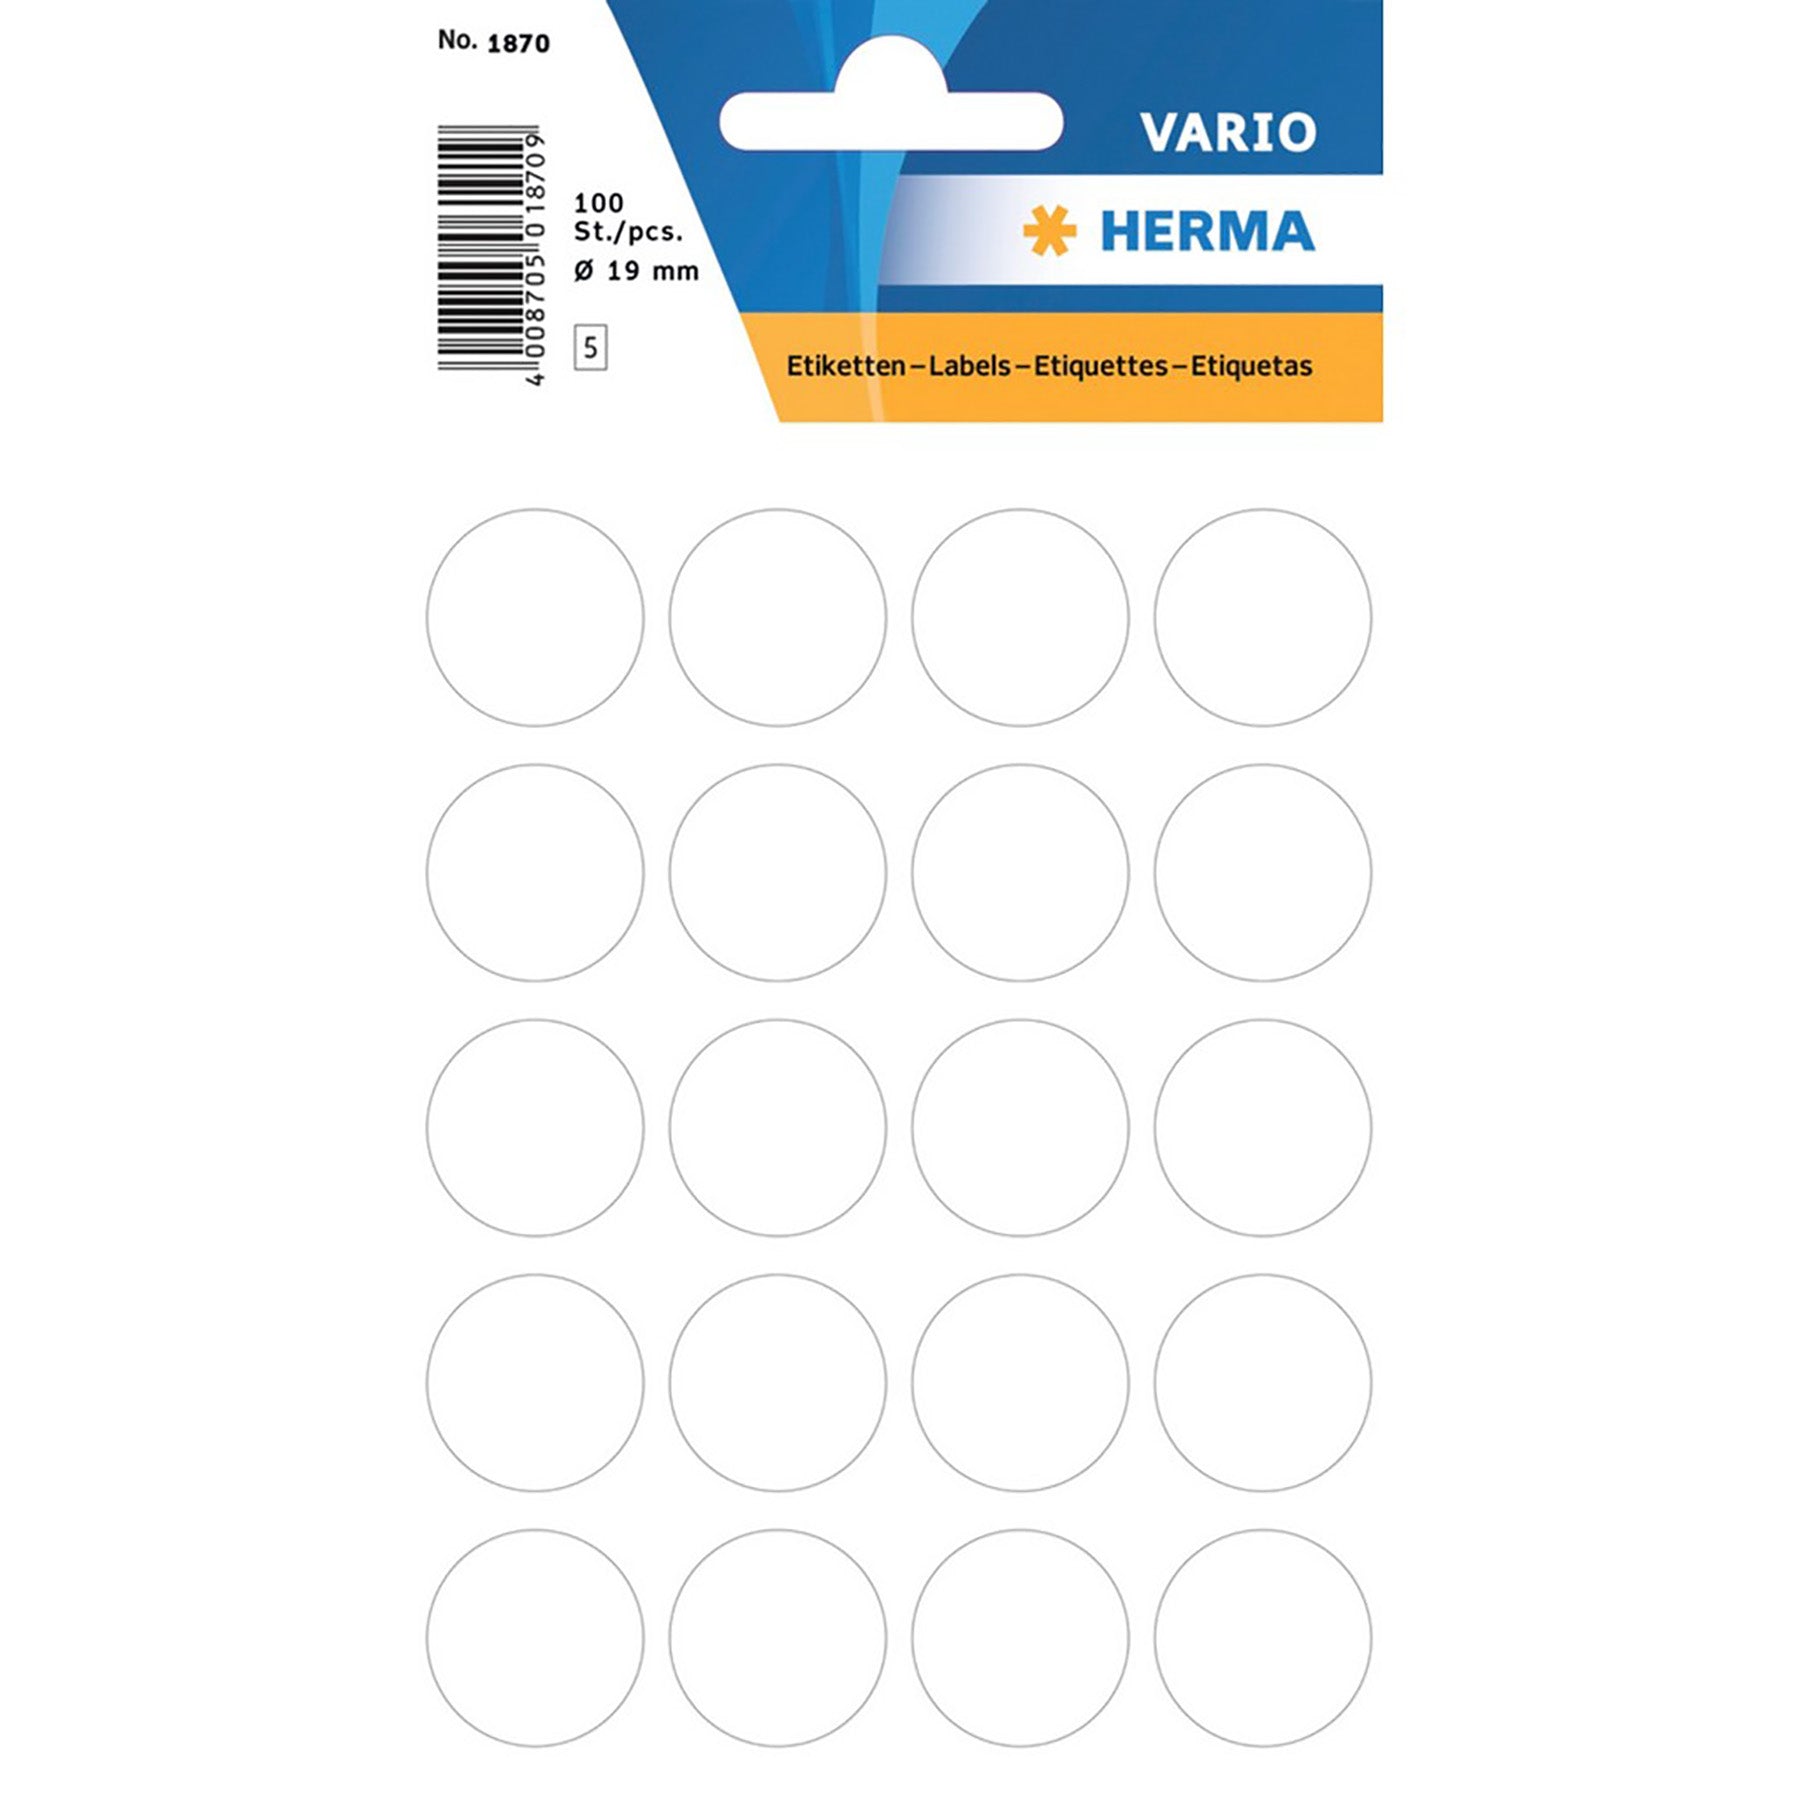 Herma Vario 5 Sheets Colour-Coding Round Labels Dots, White 0.75in